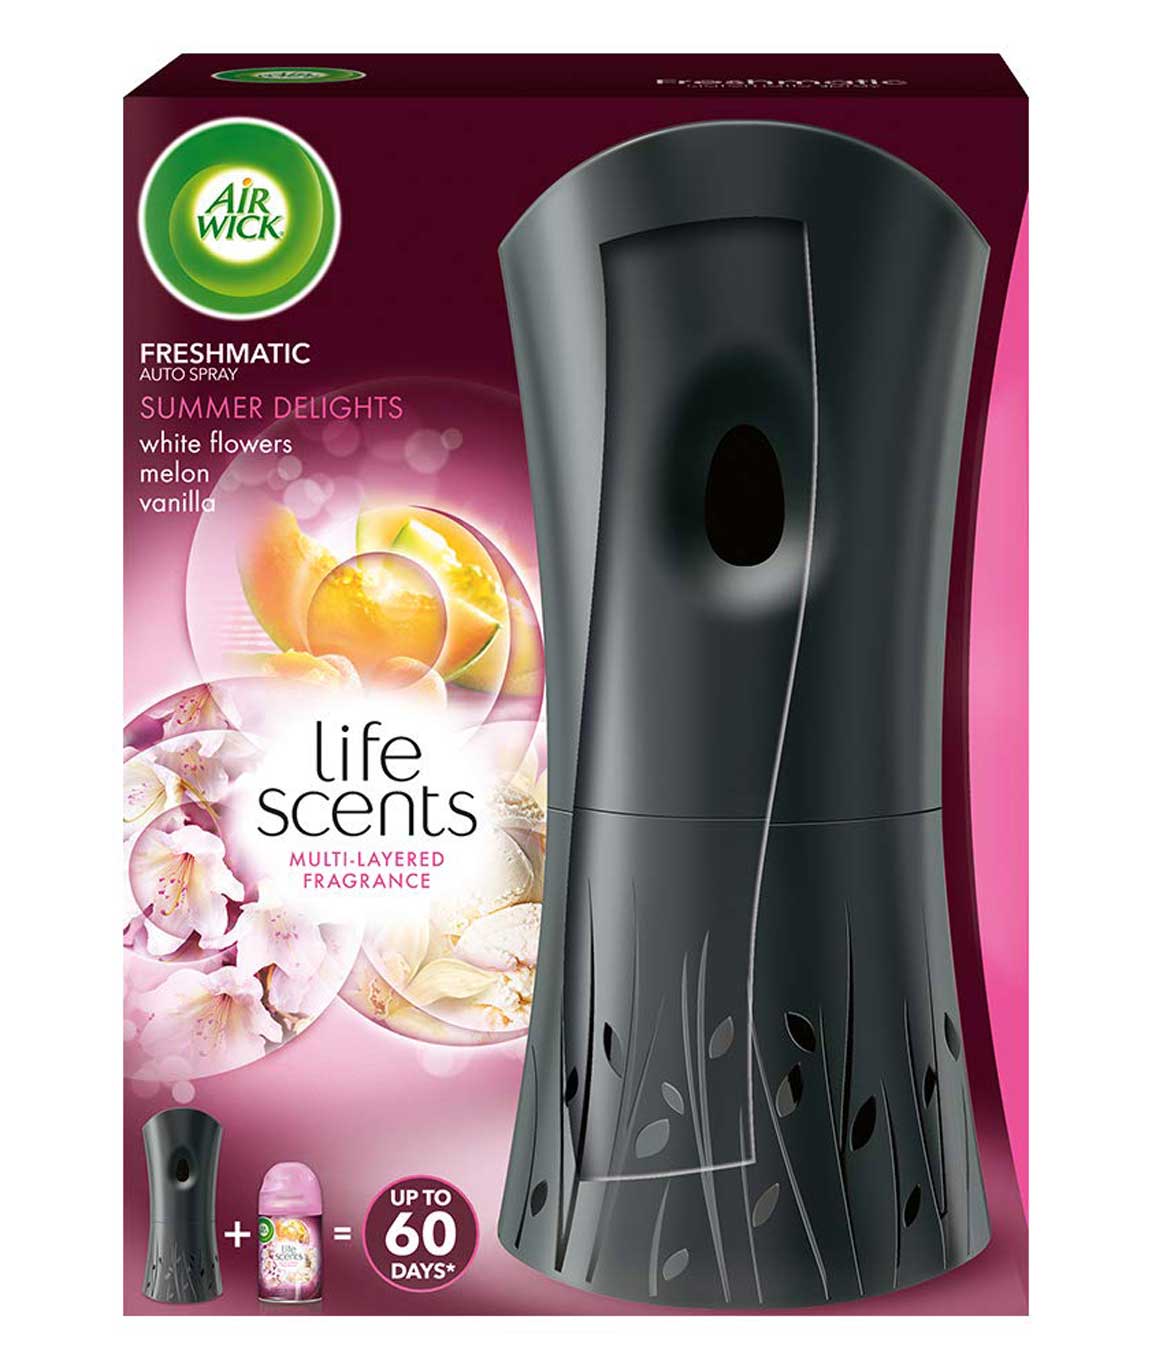 Airwick Scents of India Freshmatic Air Freshener Refill - 250 ml (Hills of  Munnar) & 'Scents of India' Freshmatic Air Freshner Refill, Aromas of  Kashmir - 250 ml Combo